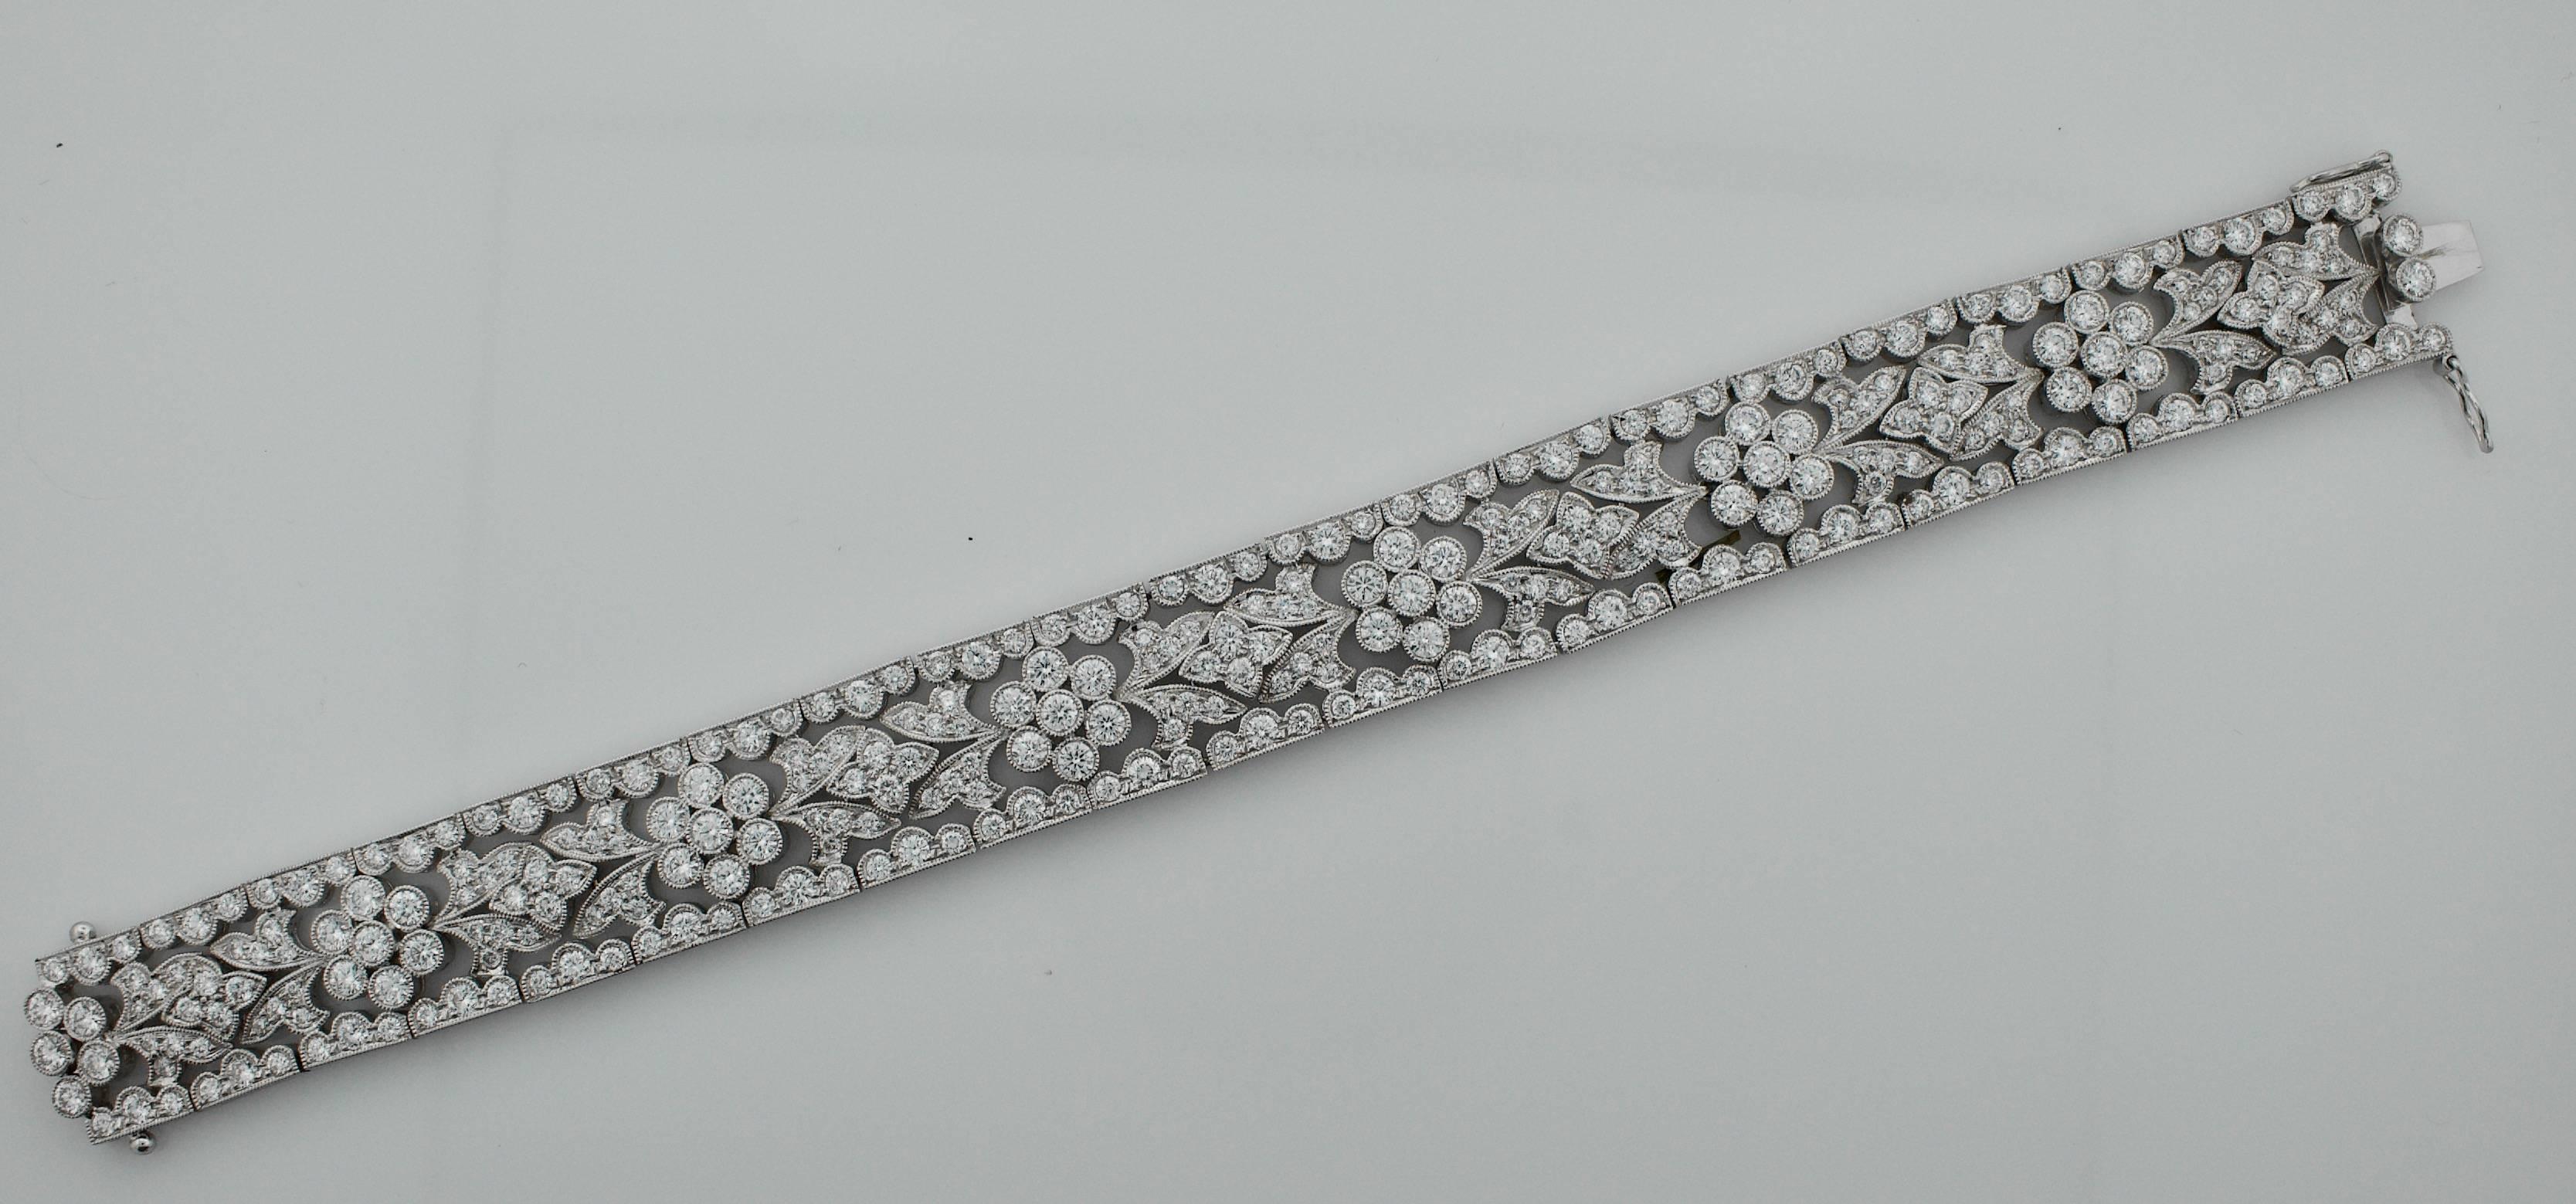 18k White Gold Diamond Bracelet with 10 carats of Diamonds
Three Hundred and Fifteen Round Brilliant Cut Diamonds weighing 10.00 carats approximately GH VVS-SI1
Beautiful Setting of the Diamonds.  All Articulated [hinged]
A Stunning Statement of